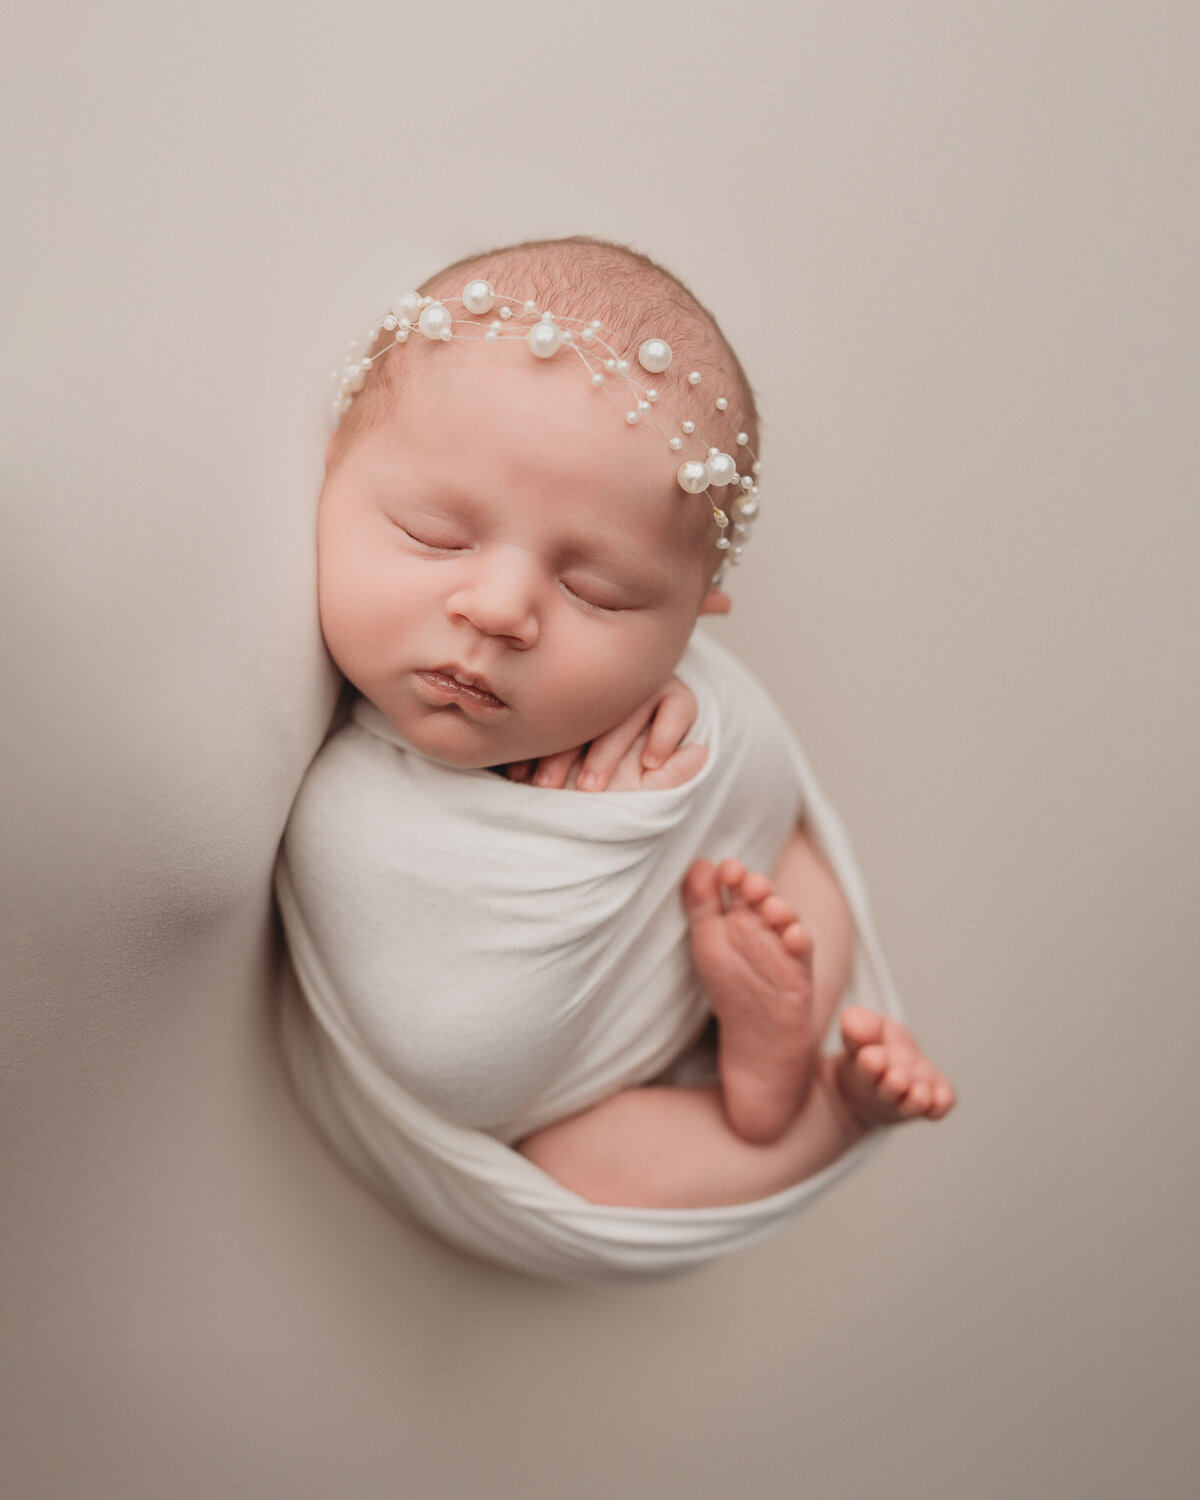 Newborn baby girl wrapped in white swaddle with feet hanging out wearing pearl headband laying on white backdrop